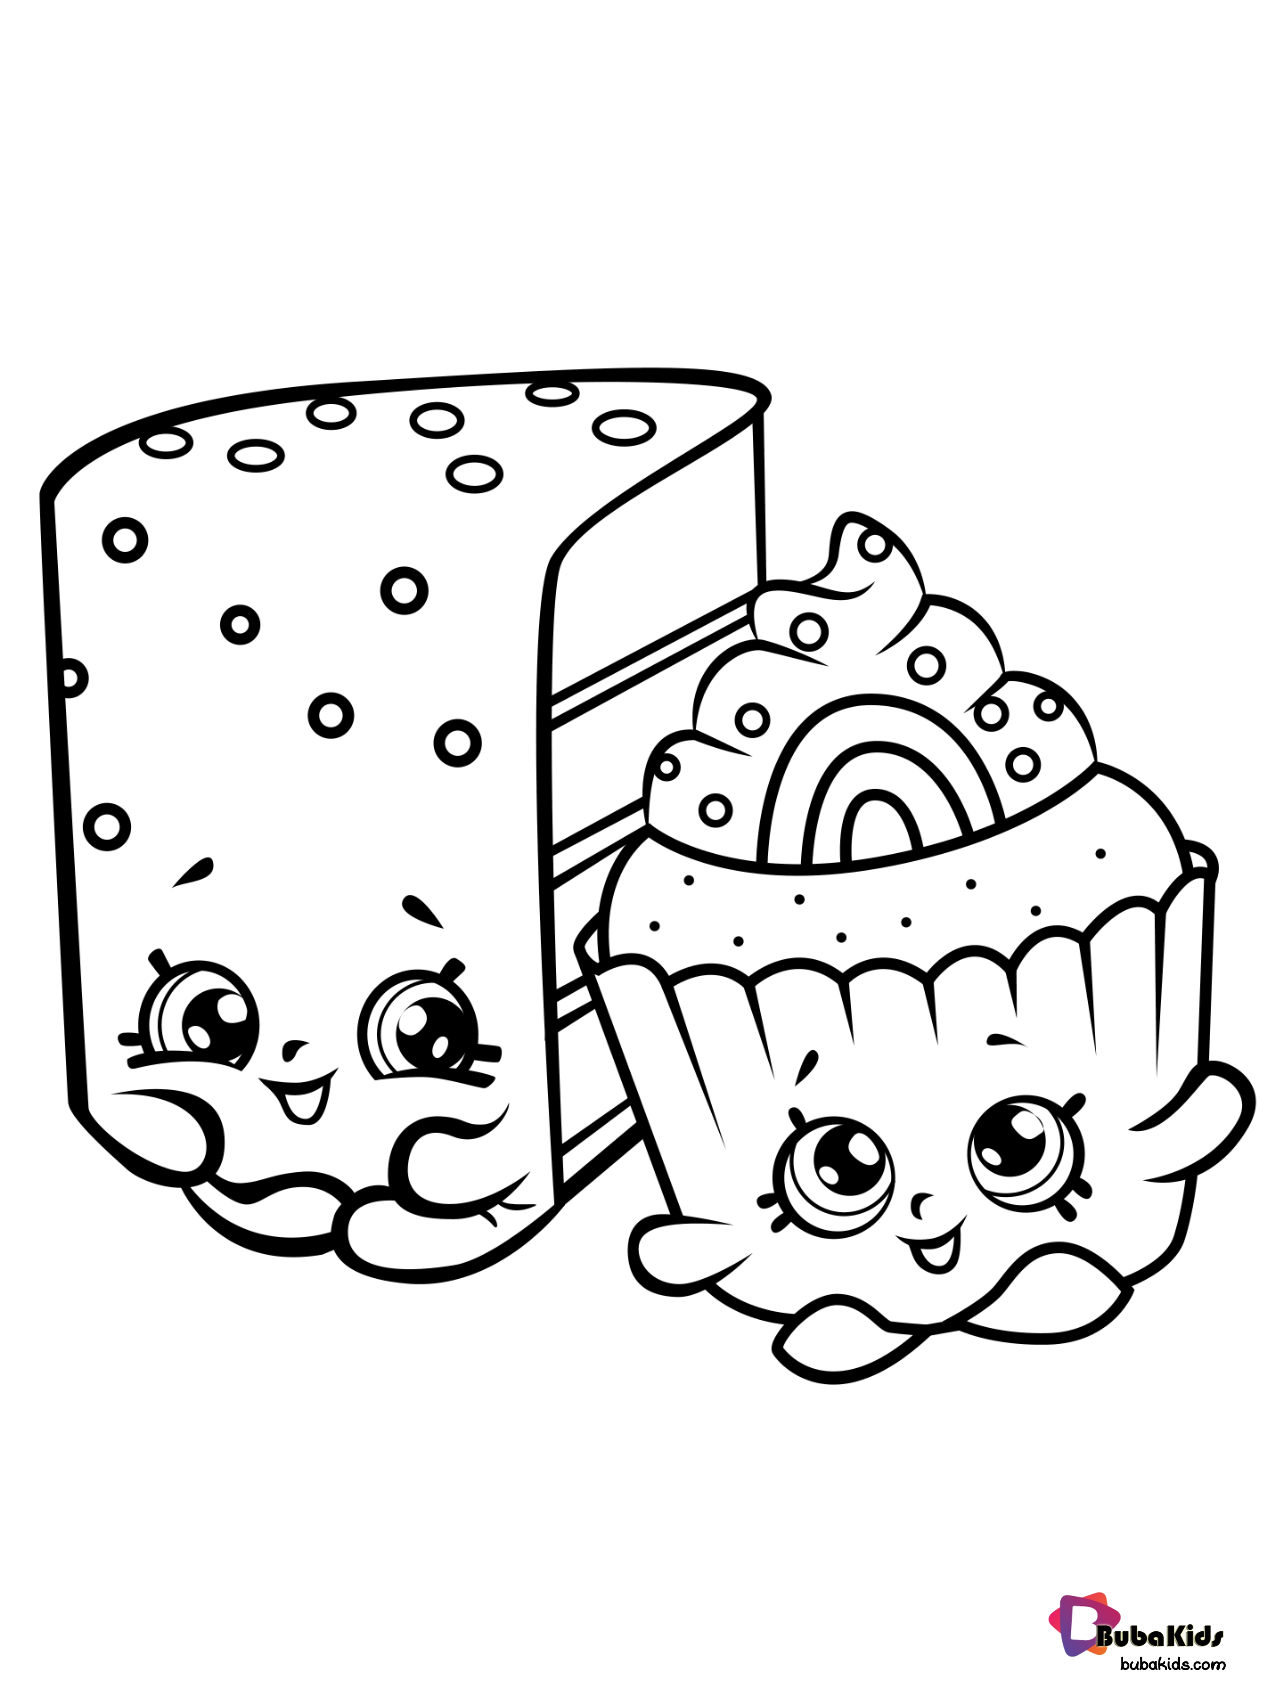 Free Shopkins coloring pages to print and color. Wallpaper